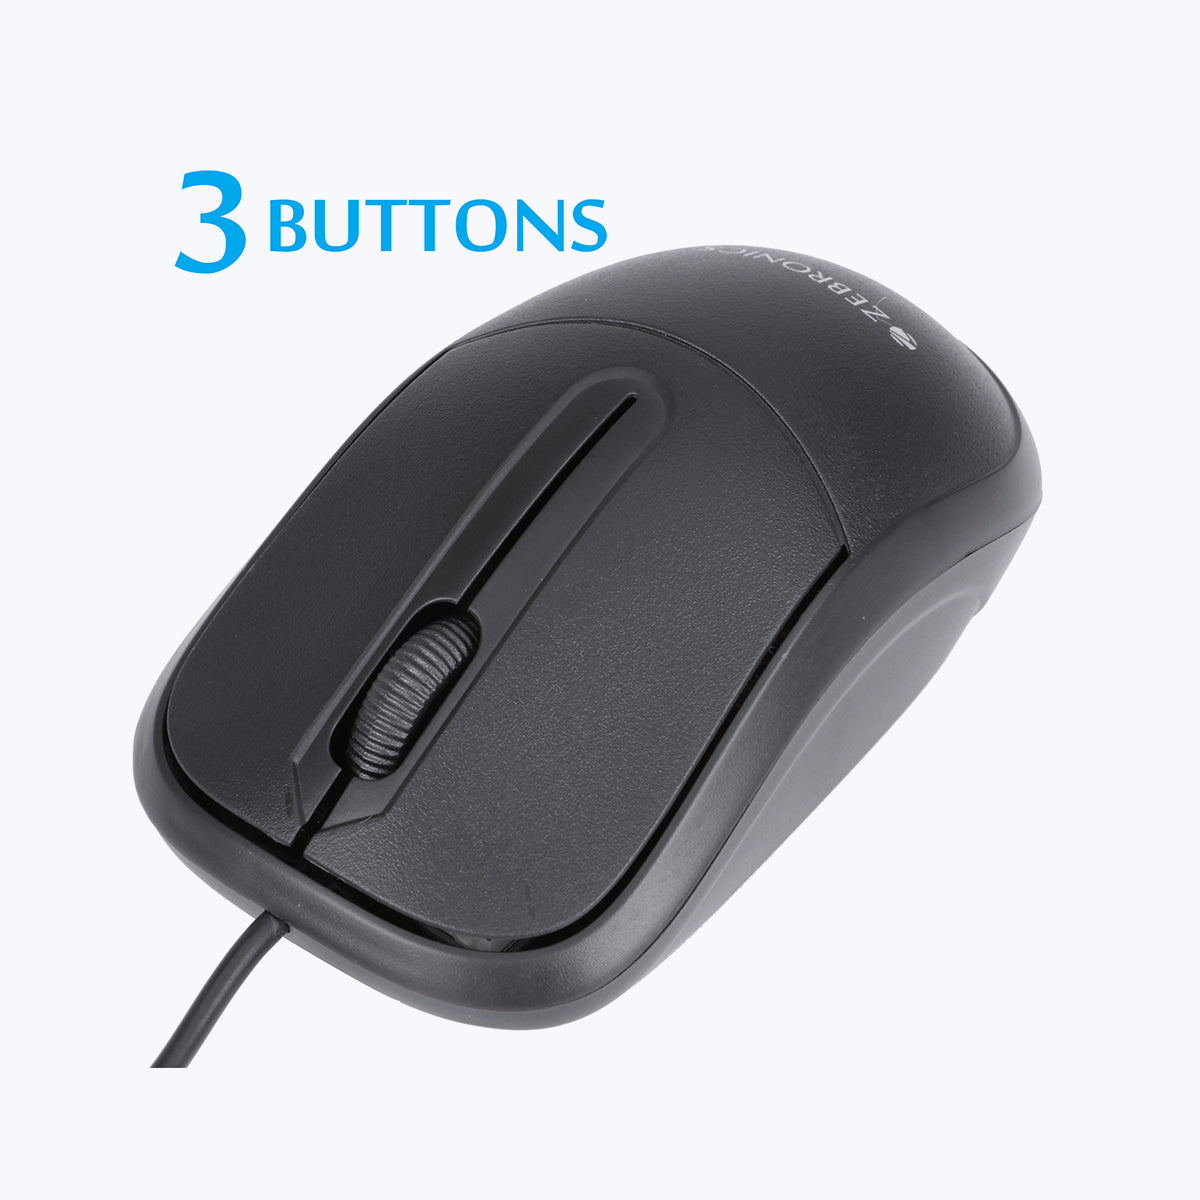 Zeb-Comfort + - Wired Mouse - Zebronics